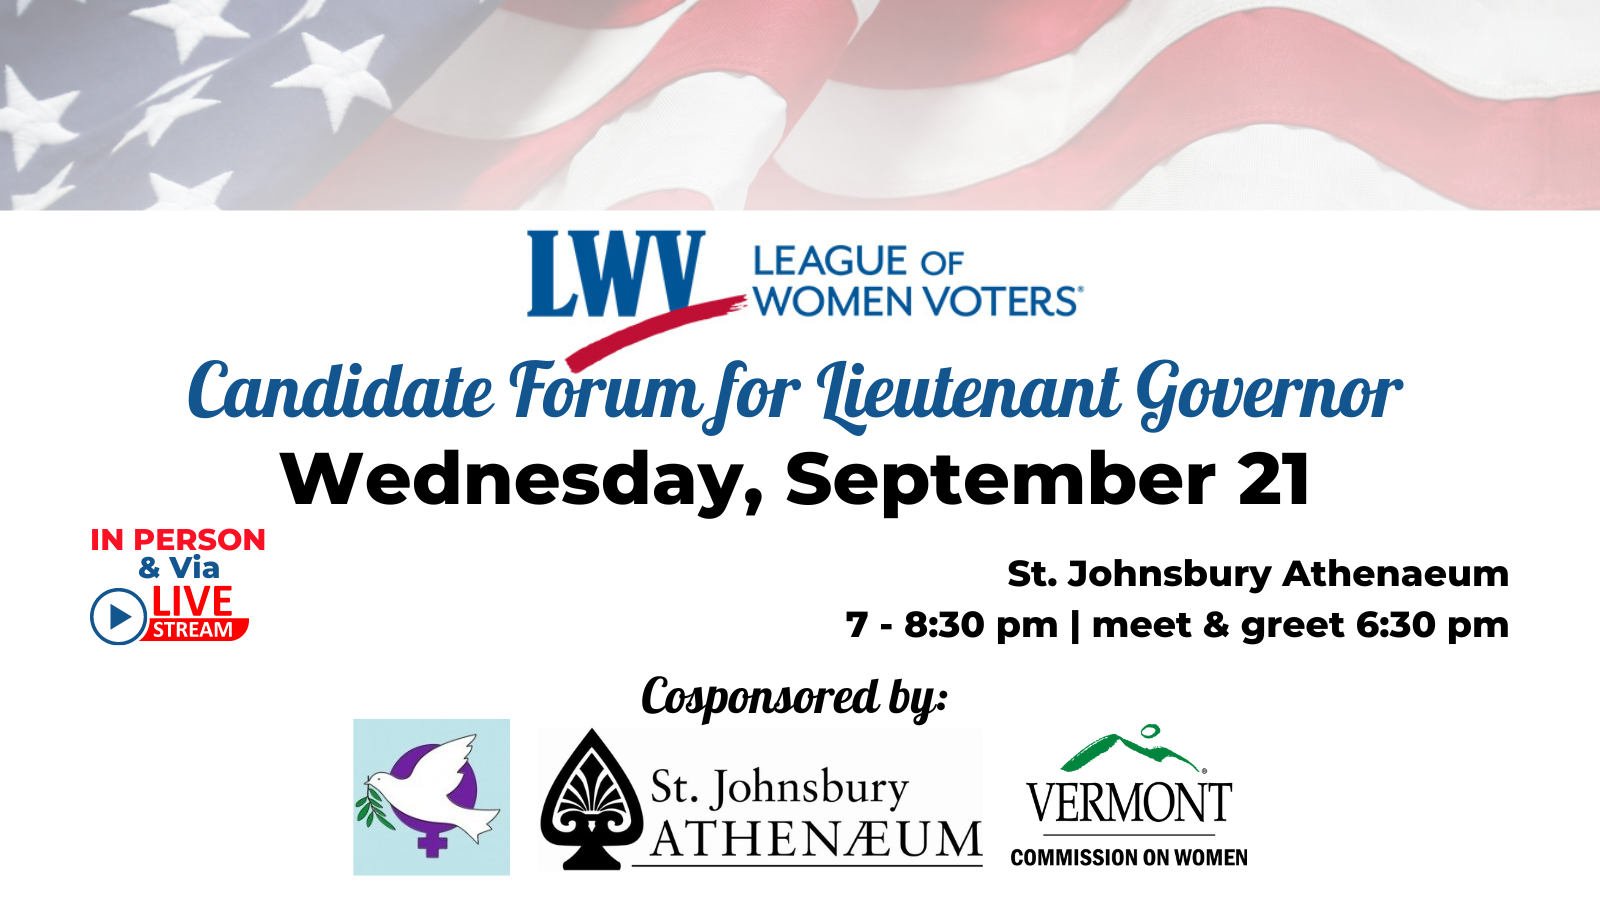 Waving flag graphic with League of Women Voters logo, Candidate forum for Lt. Governor Wednesday, September 21, St. Johnsbury Athenaaeum 7-8 pm meet and greet 6:30 in person and via live stream.  Co sponsored by and logos of VCW, St. J Athenaeum WILPF